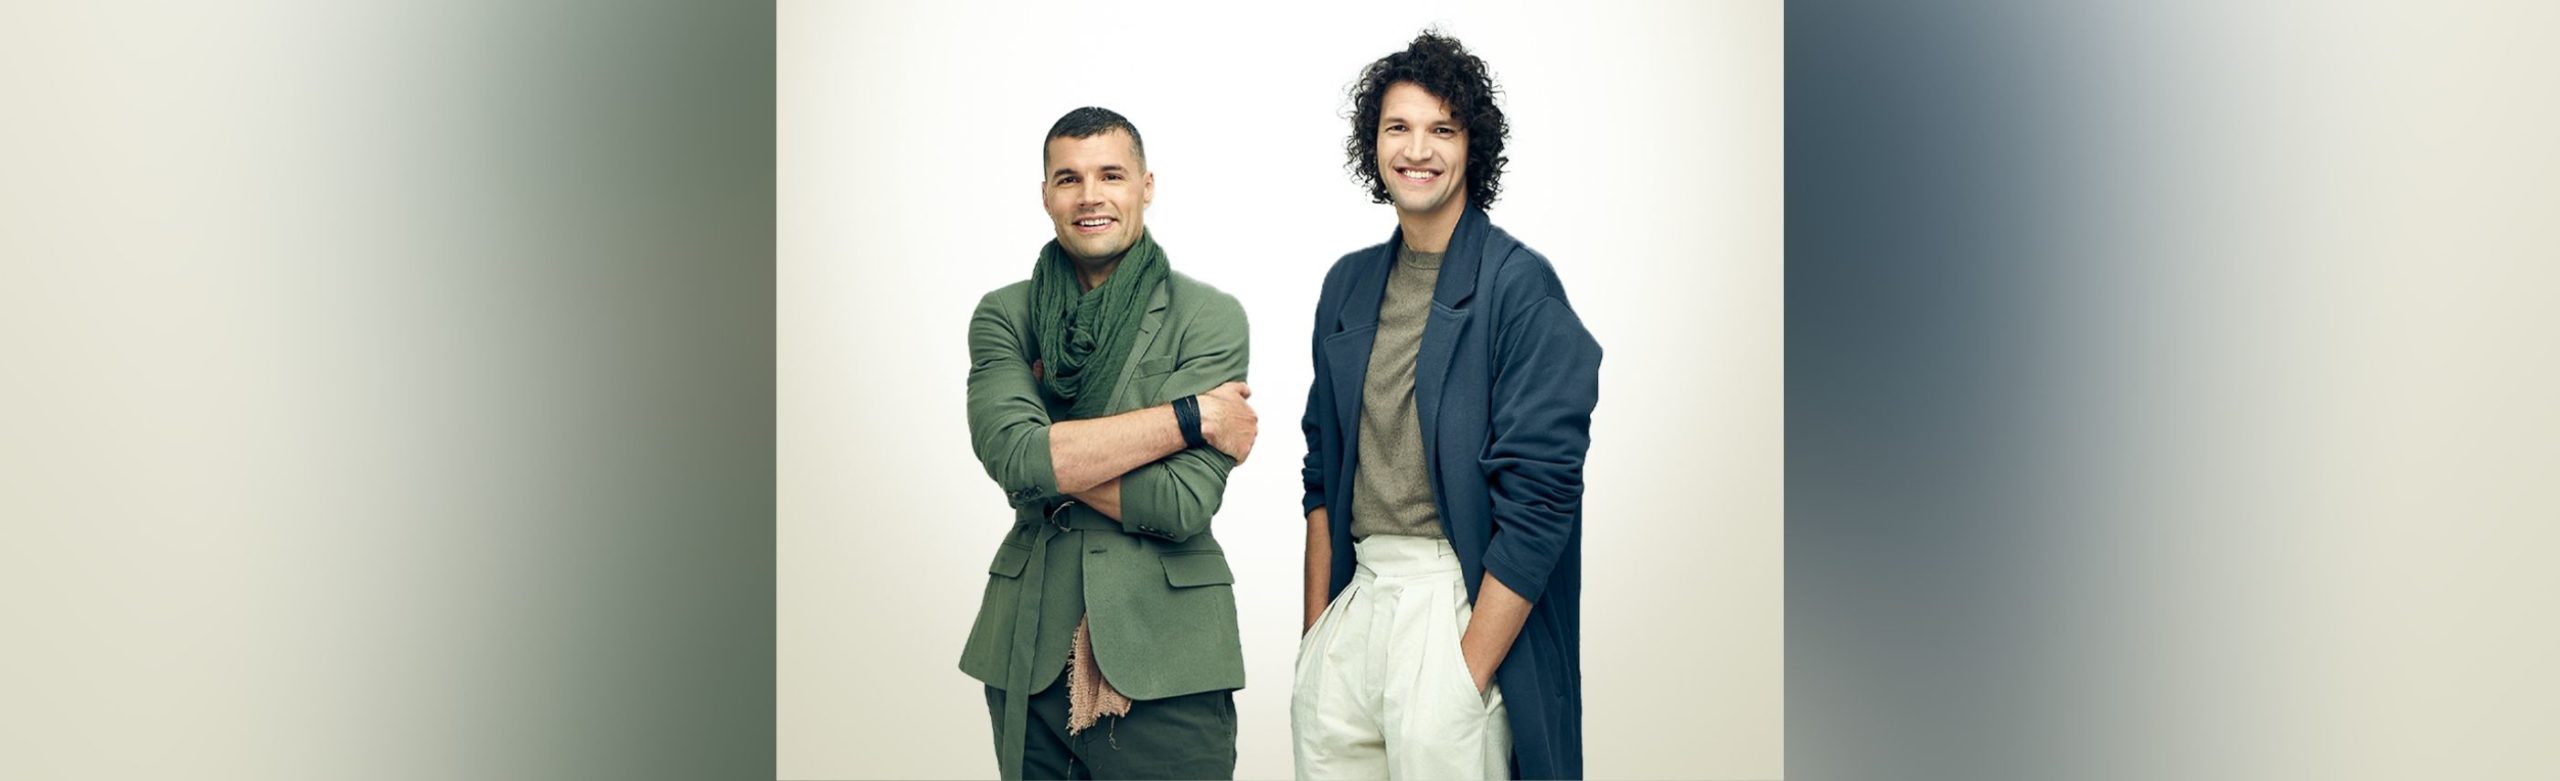 For King & Country to Premiere New Song on “Good Morning America” Image